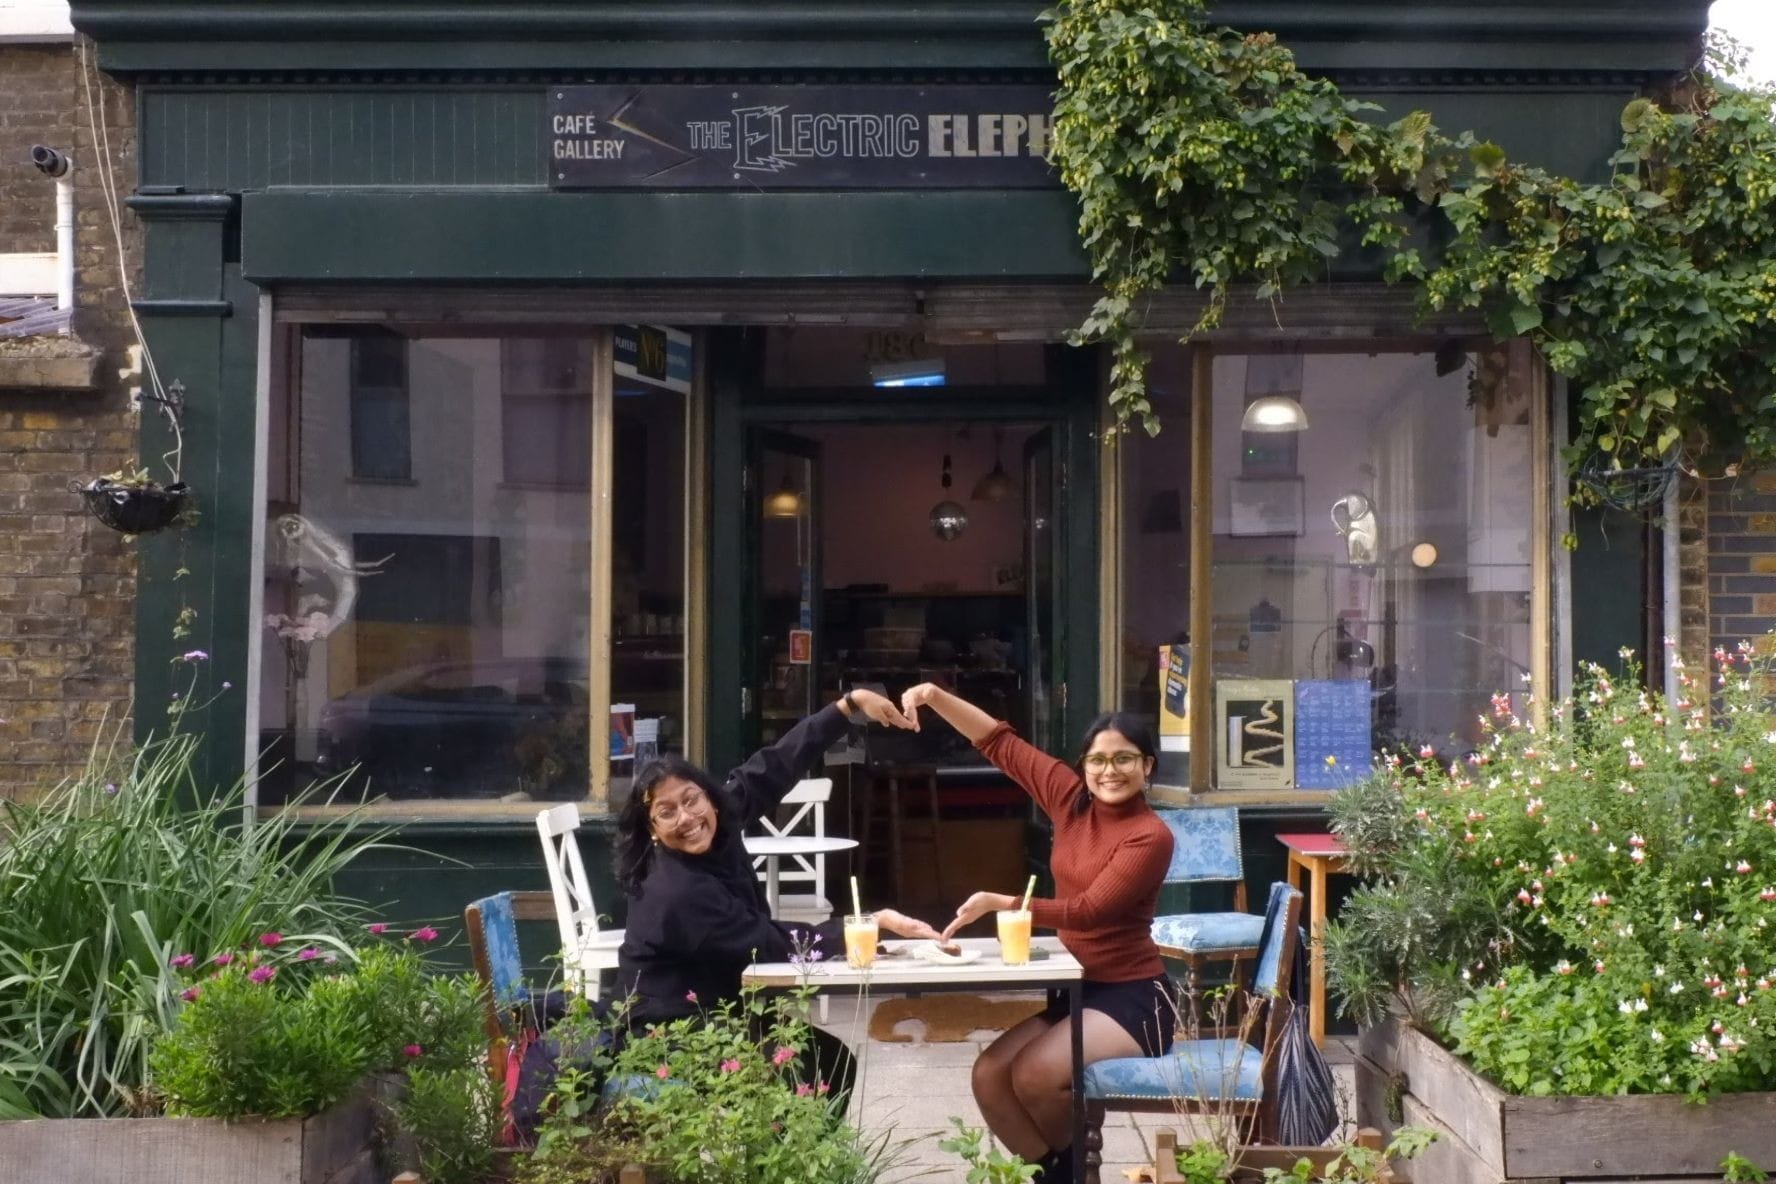 Two women are sat at a table in front of the cafe with fresh juice and food on it. They are smiling. There are planters and a plant climbing high 